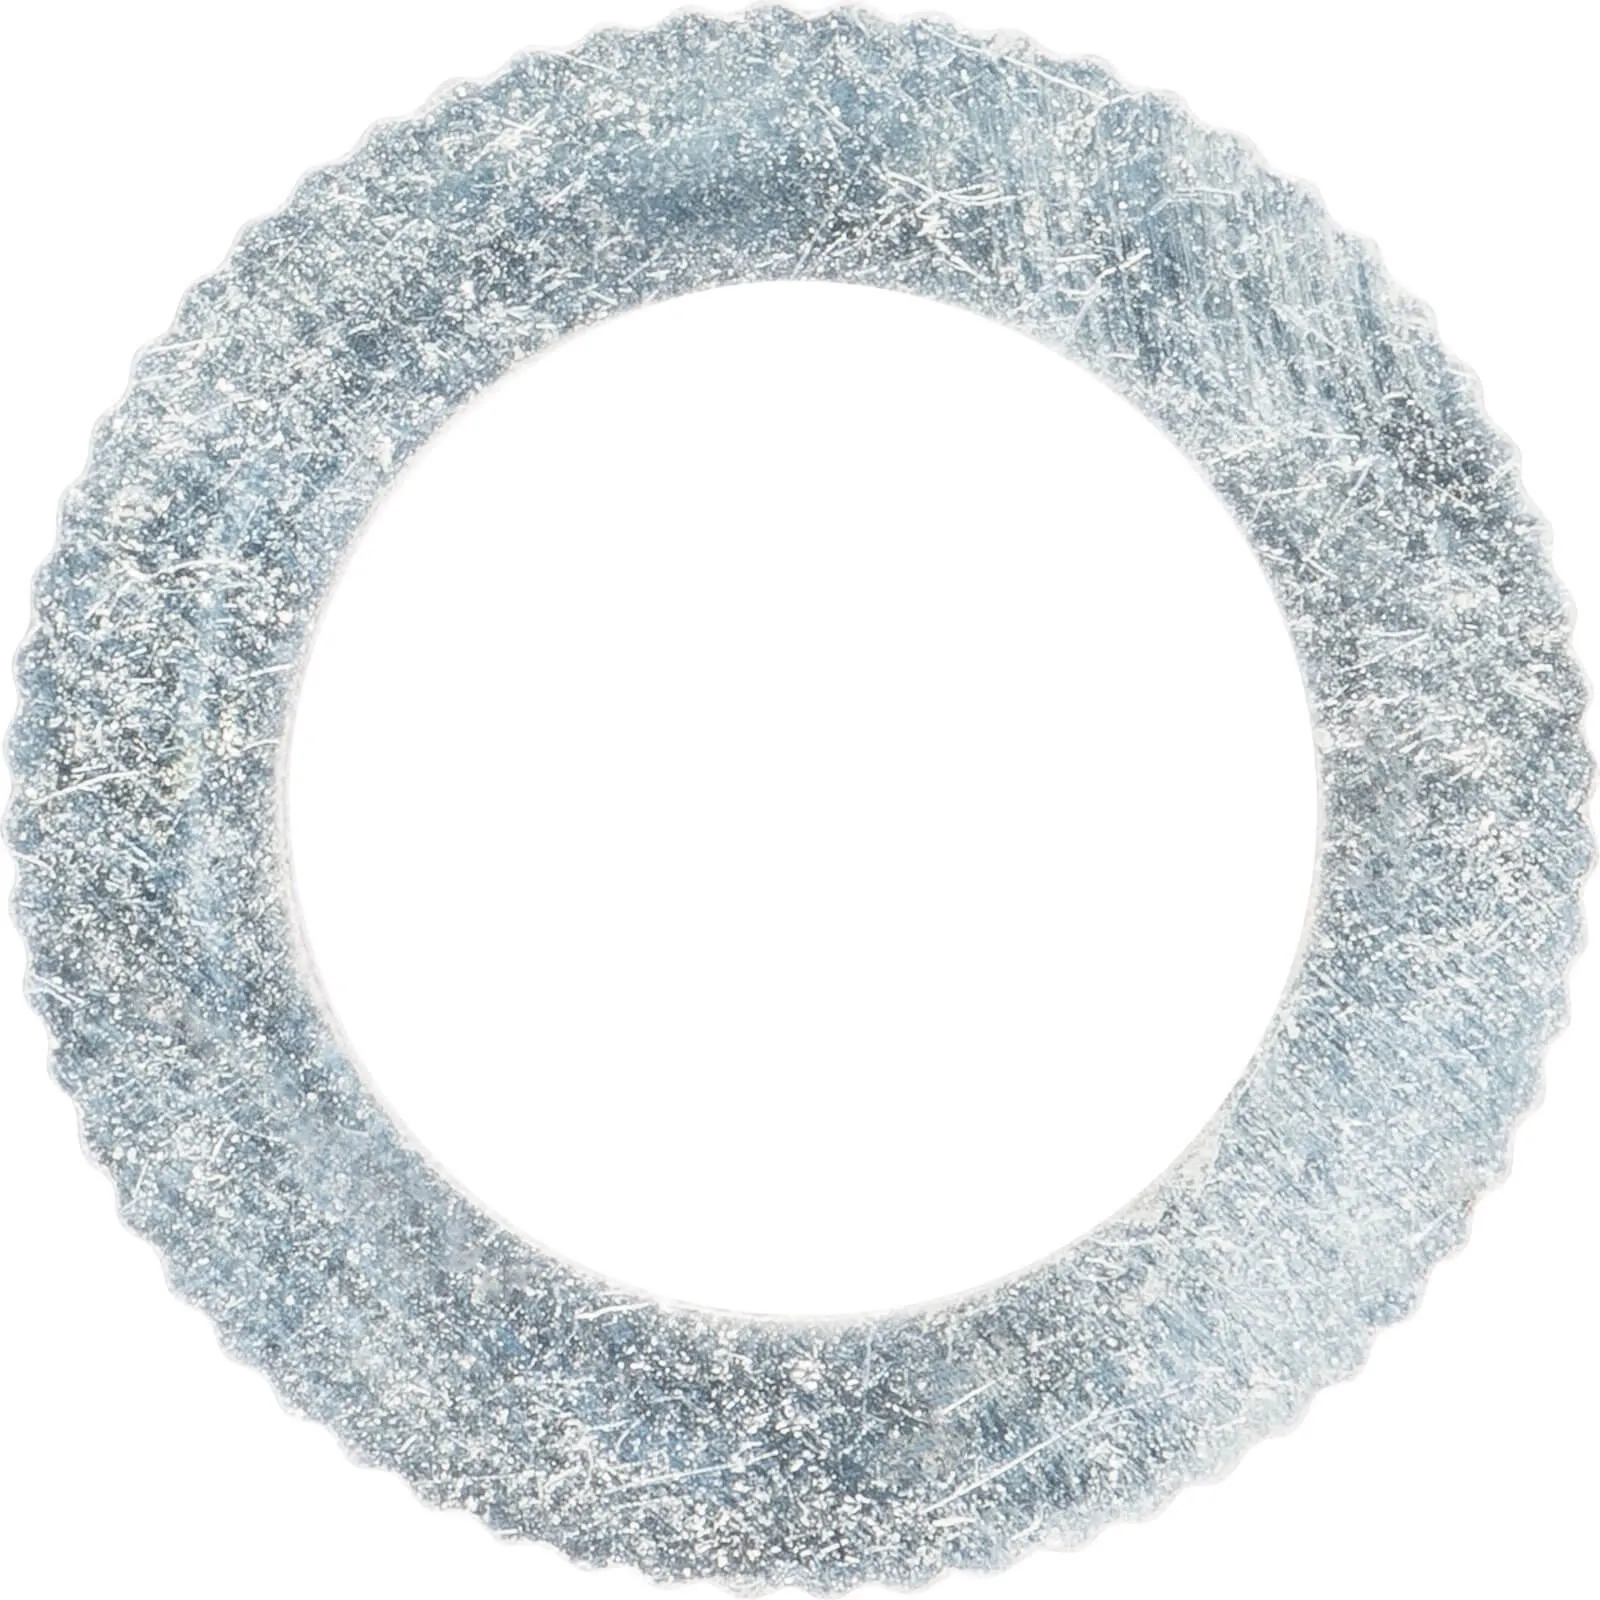 Bosch Reducing Ring for 1.0mm to 1.3mm Circular Saw Blades - 20mm, 1/2" / 12.7mm, 0.8mm